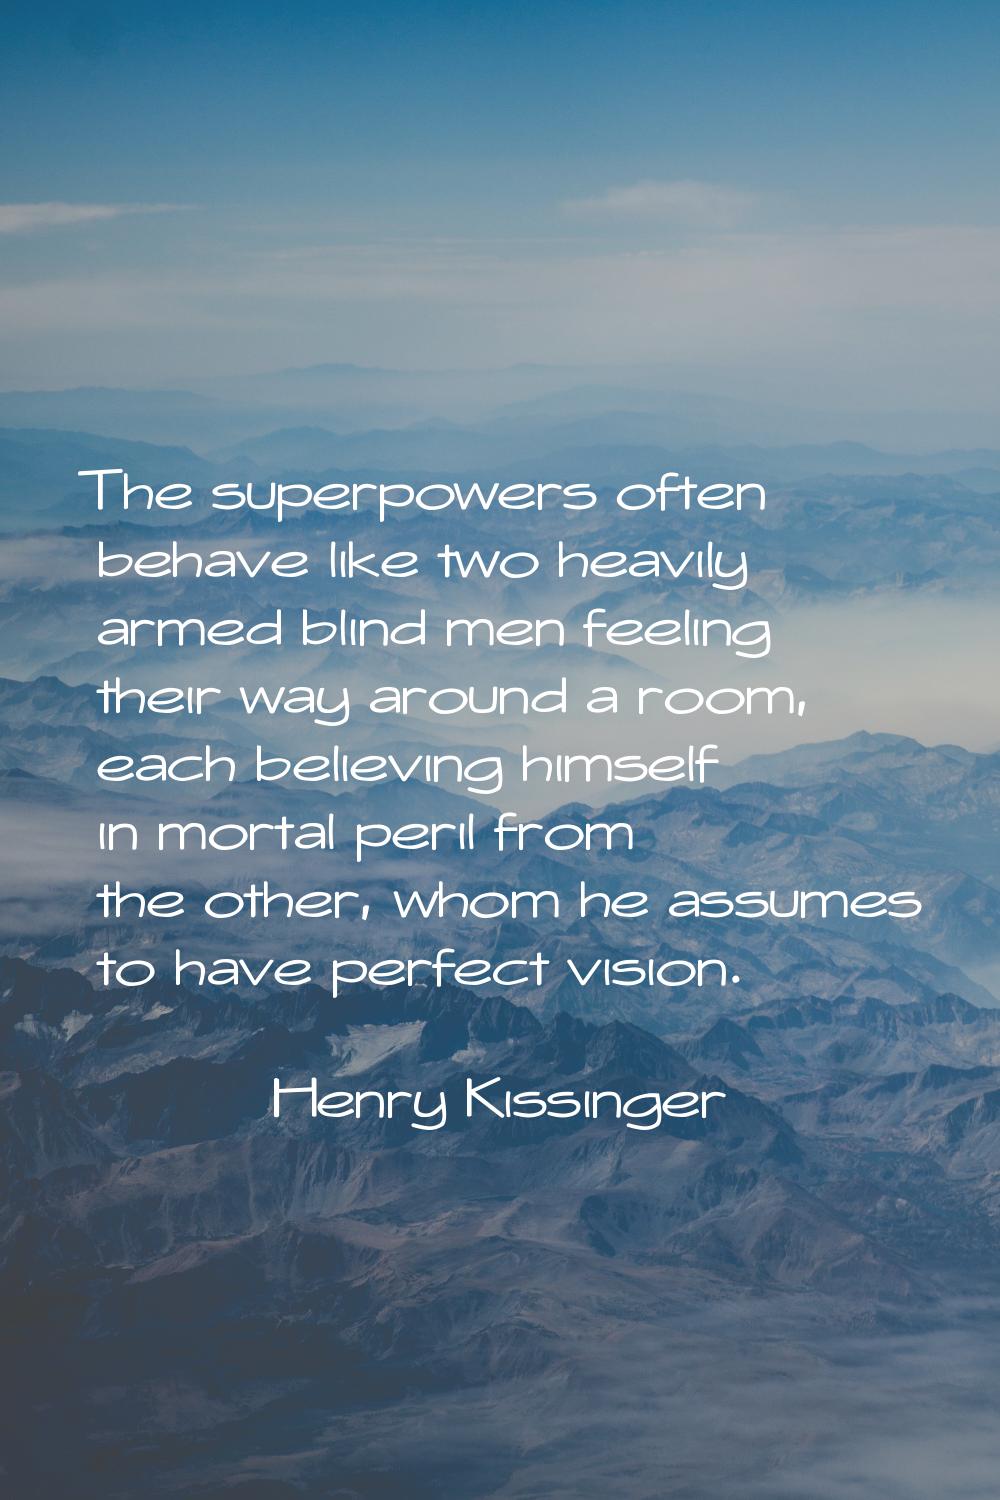 The superpowers often behave like two heavily armed blind men feeling their way around a room, each